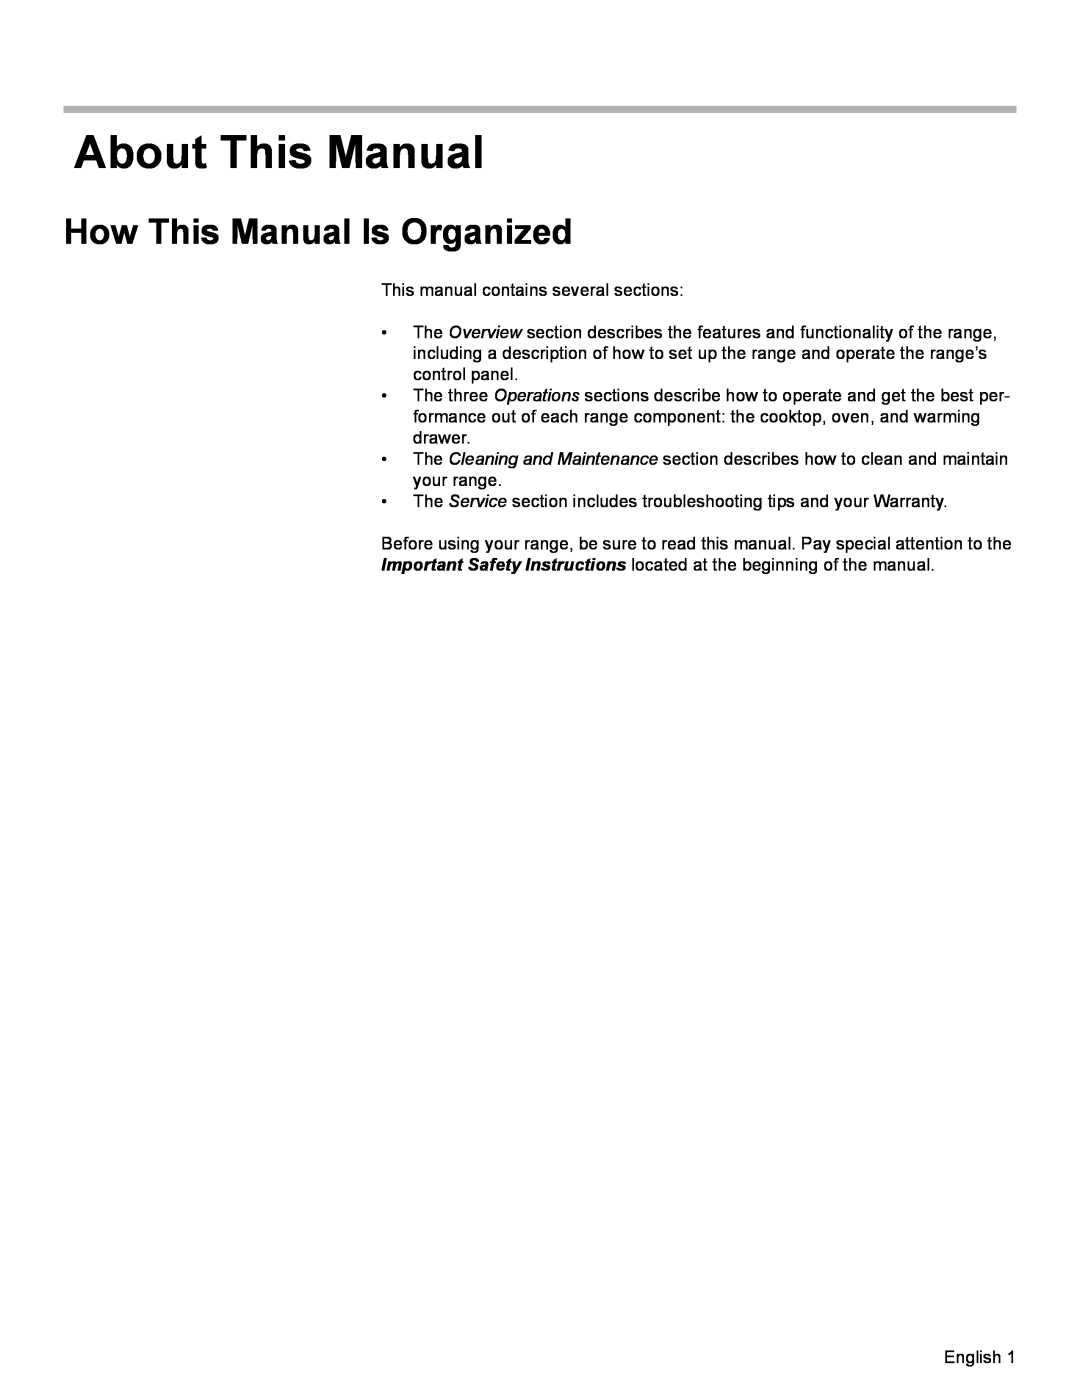 Siemens HE2425 manual About This Manual, How This Manual Is Organized 